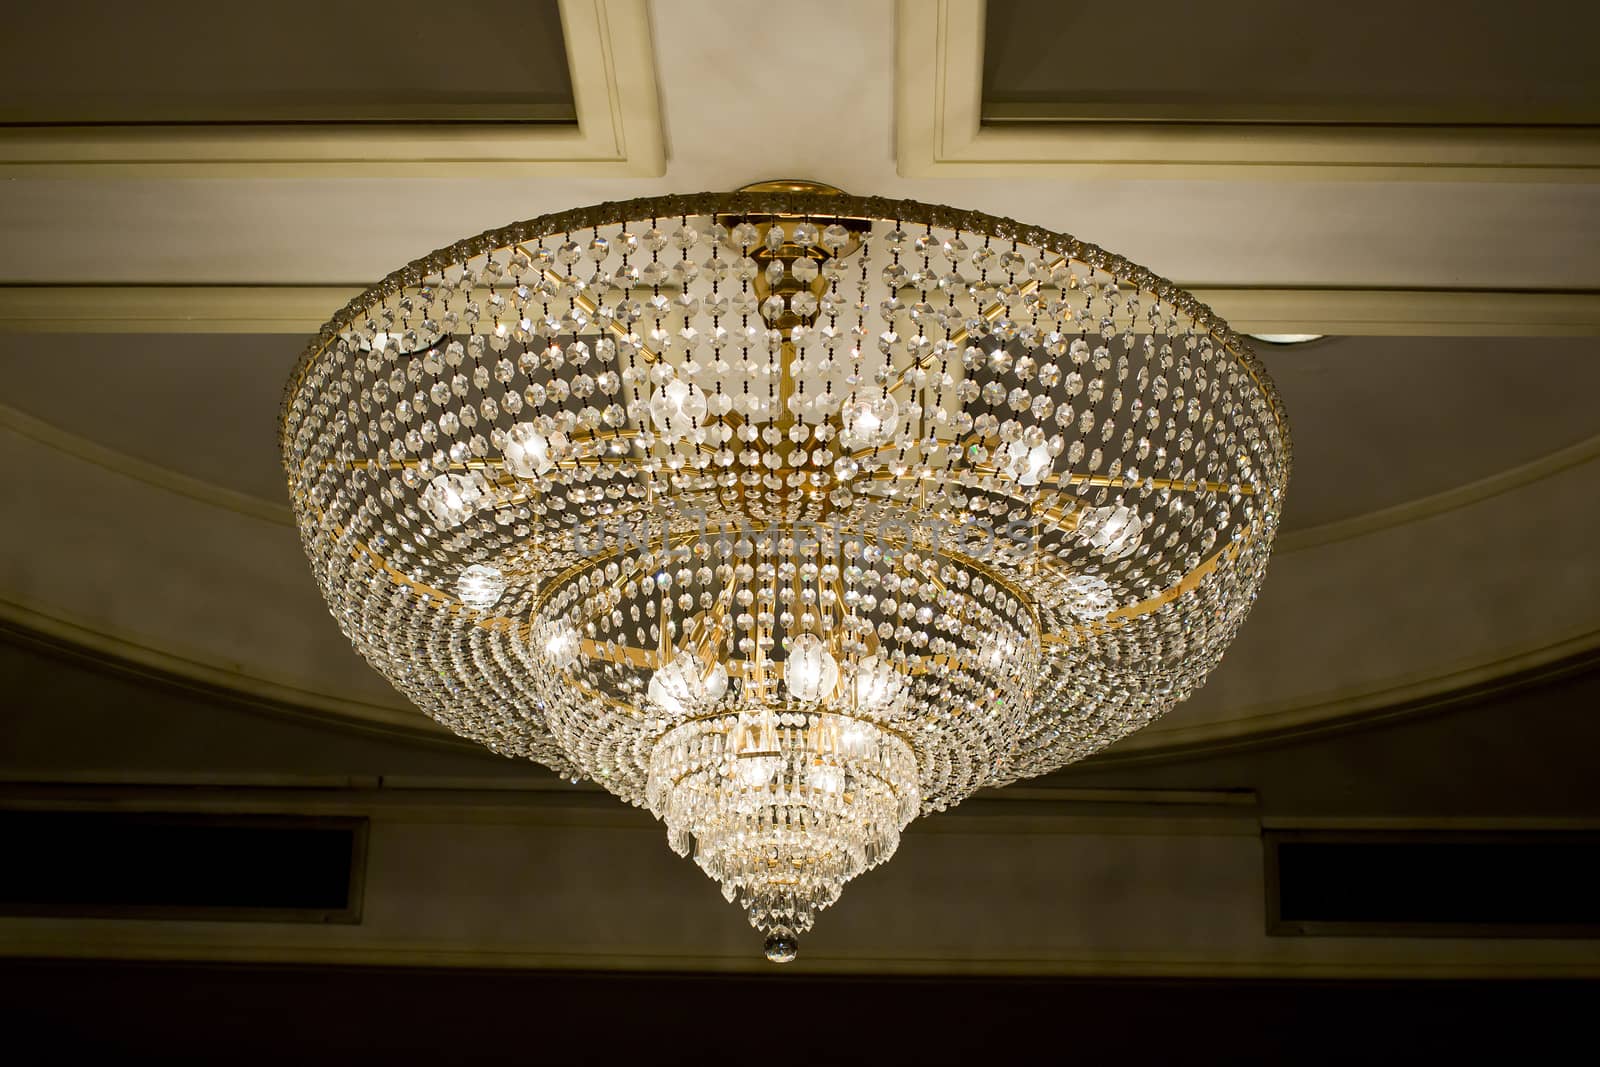 Chrystal chandelier close-up with copy space by art9858